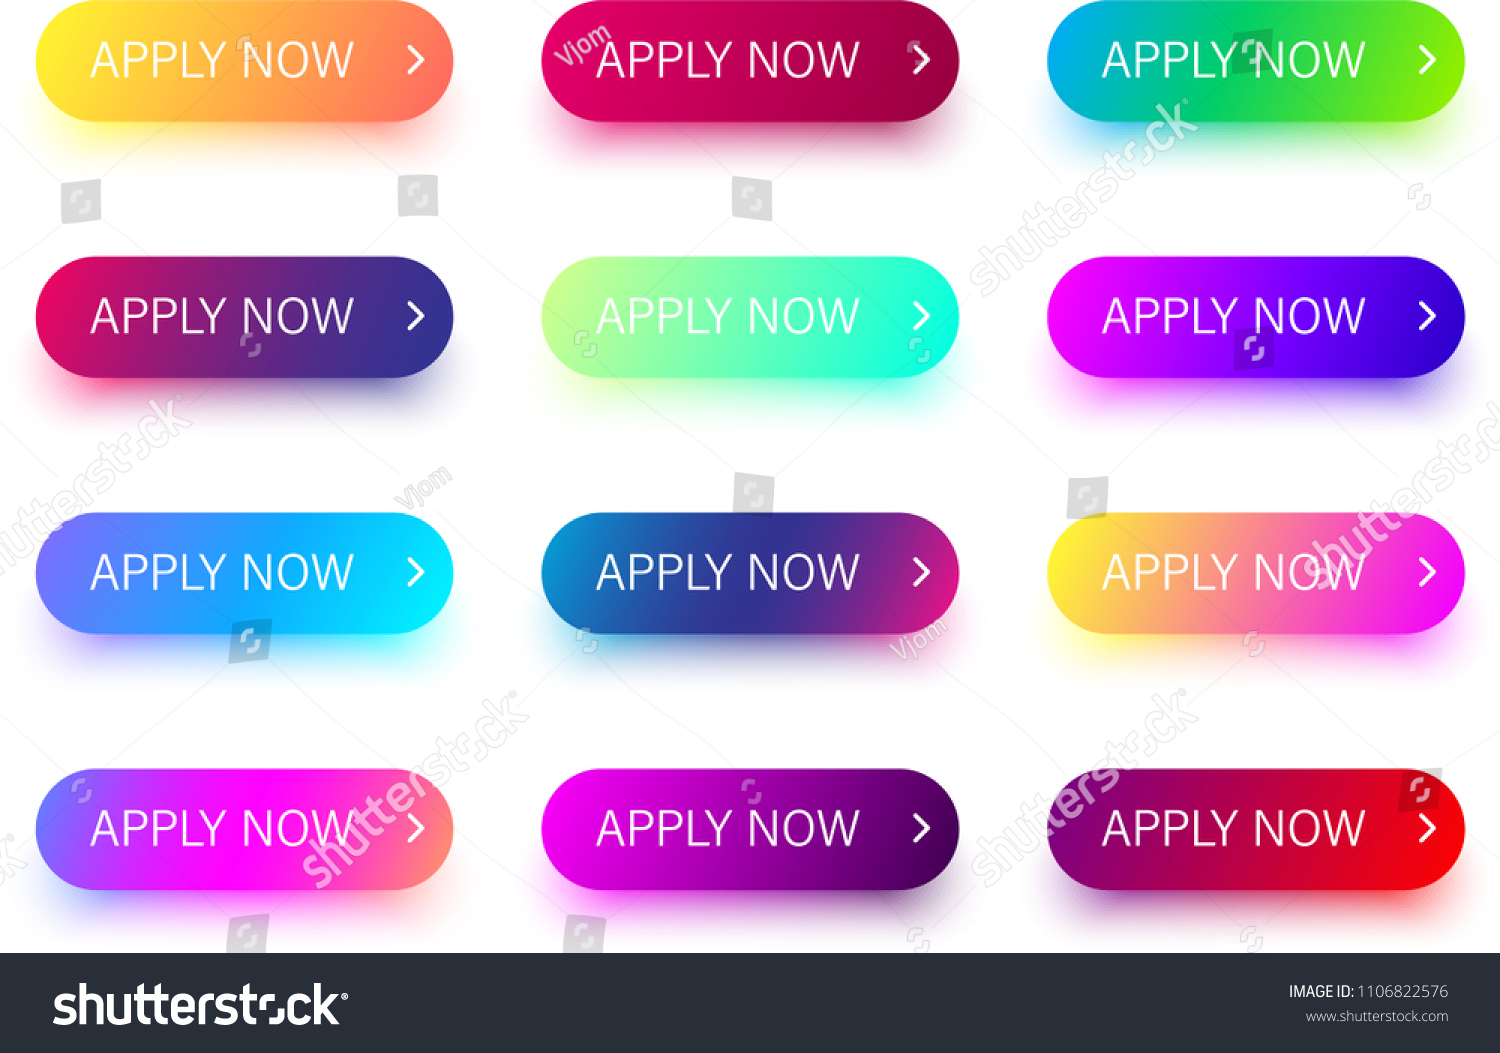 Set of bright colorful apply now buttons isolated on white background. Vector illustration.
 #1106822576